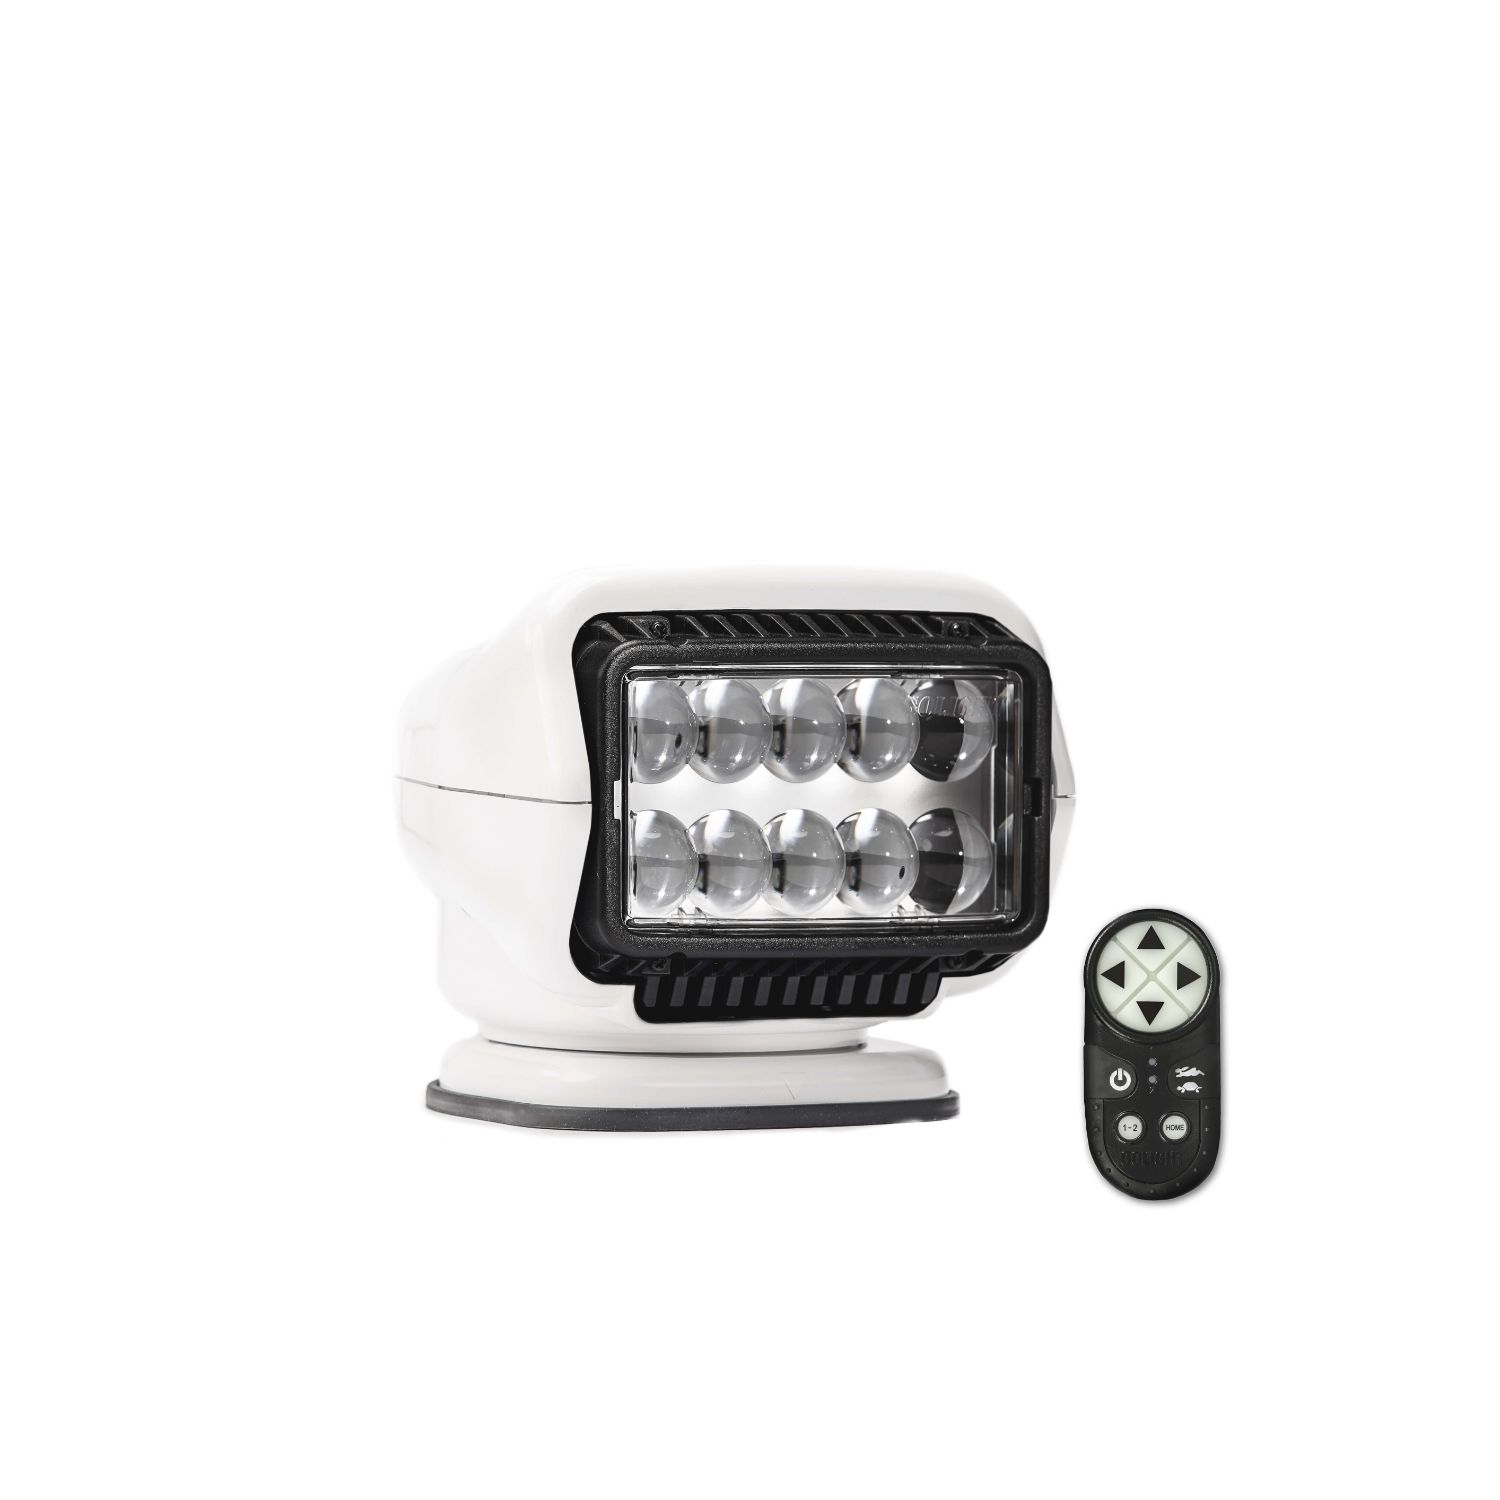 STRYKER LED MAGNETIC MOUNT WIRELESS HANDHELD REMOTE-WHITE